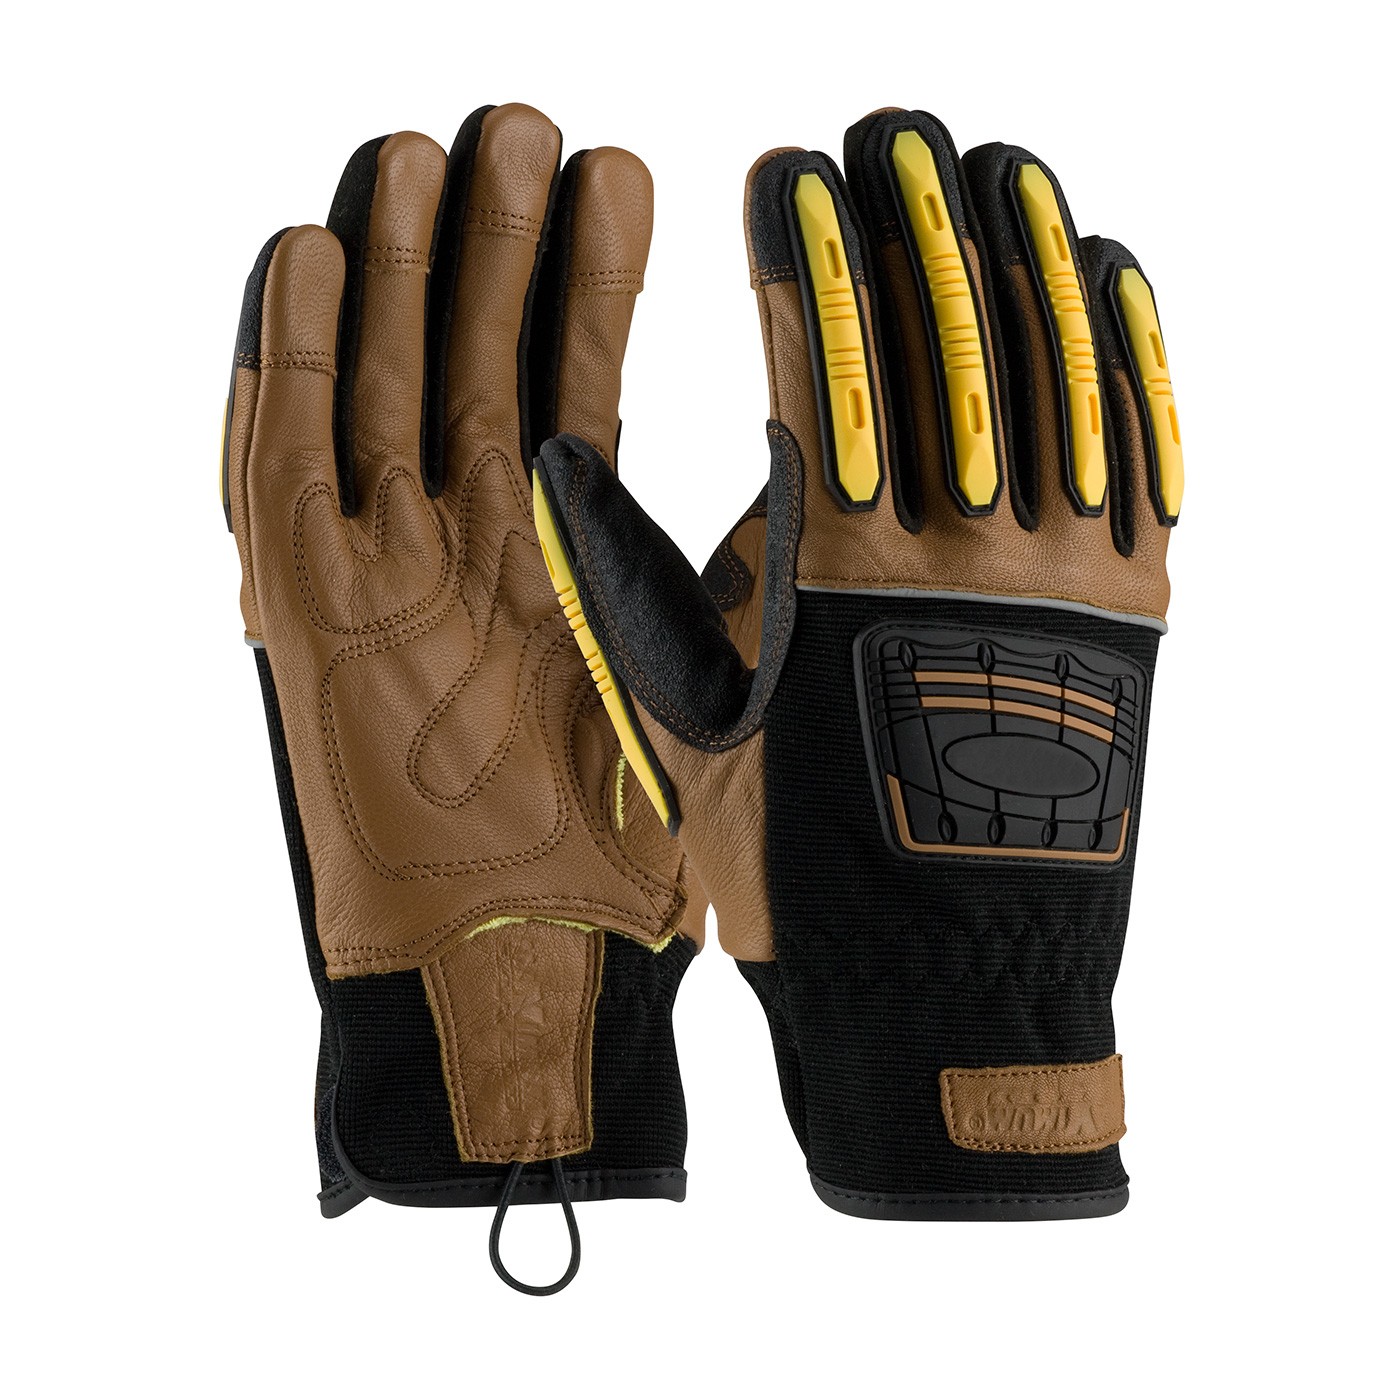 Maximum Safety® Reinforced Goatskin Leather Palm Glove with Leather Back, Kevlar® Lining and TPR Molded Knuckle and Dorsal Guards  (#120-4150)